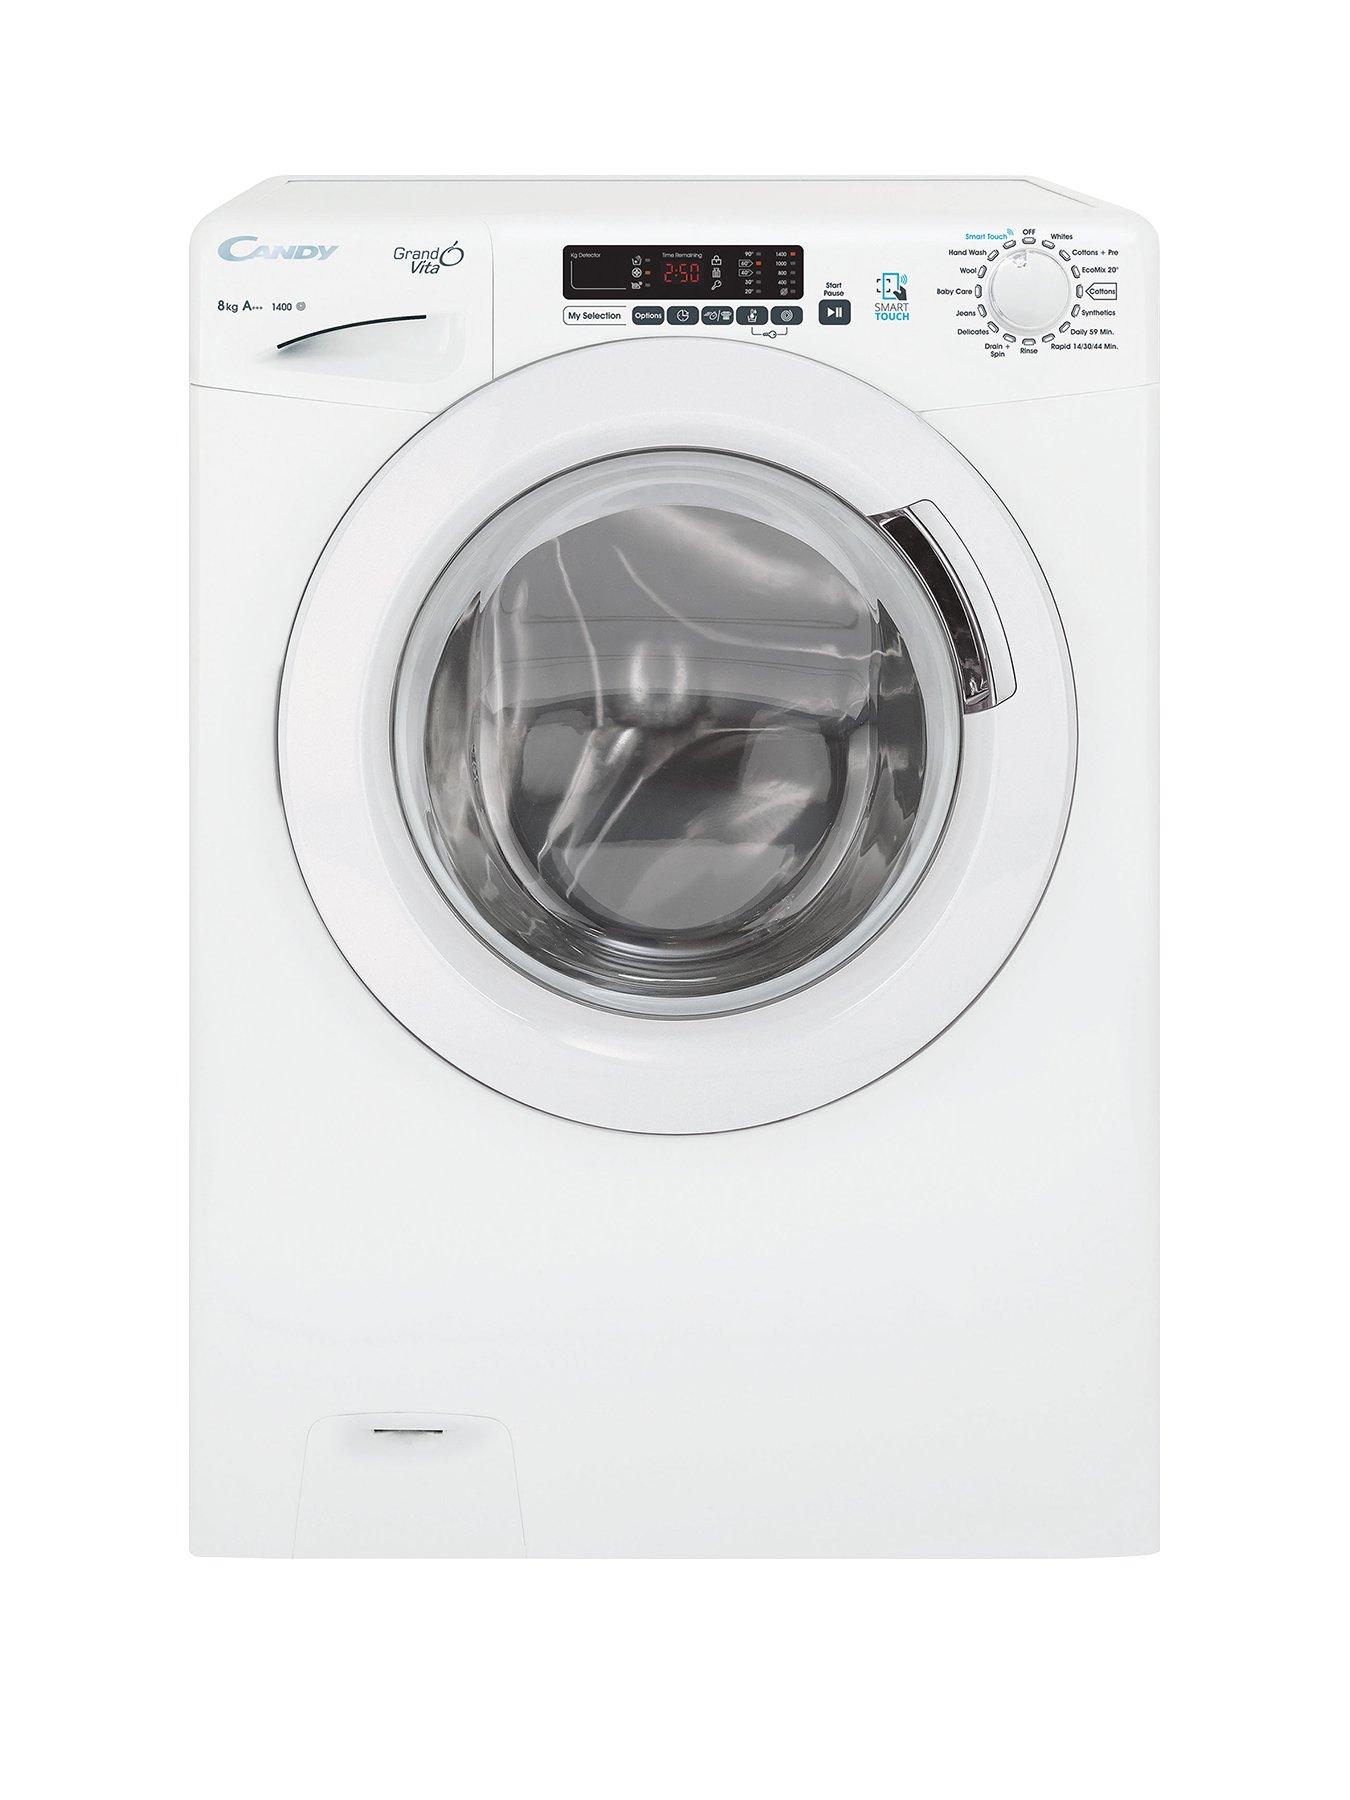 Candy Grand’O Vita Gvs148Dc3 8Kg Wash, 1400 Spin Washing Machine With Smart Touch – White